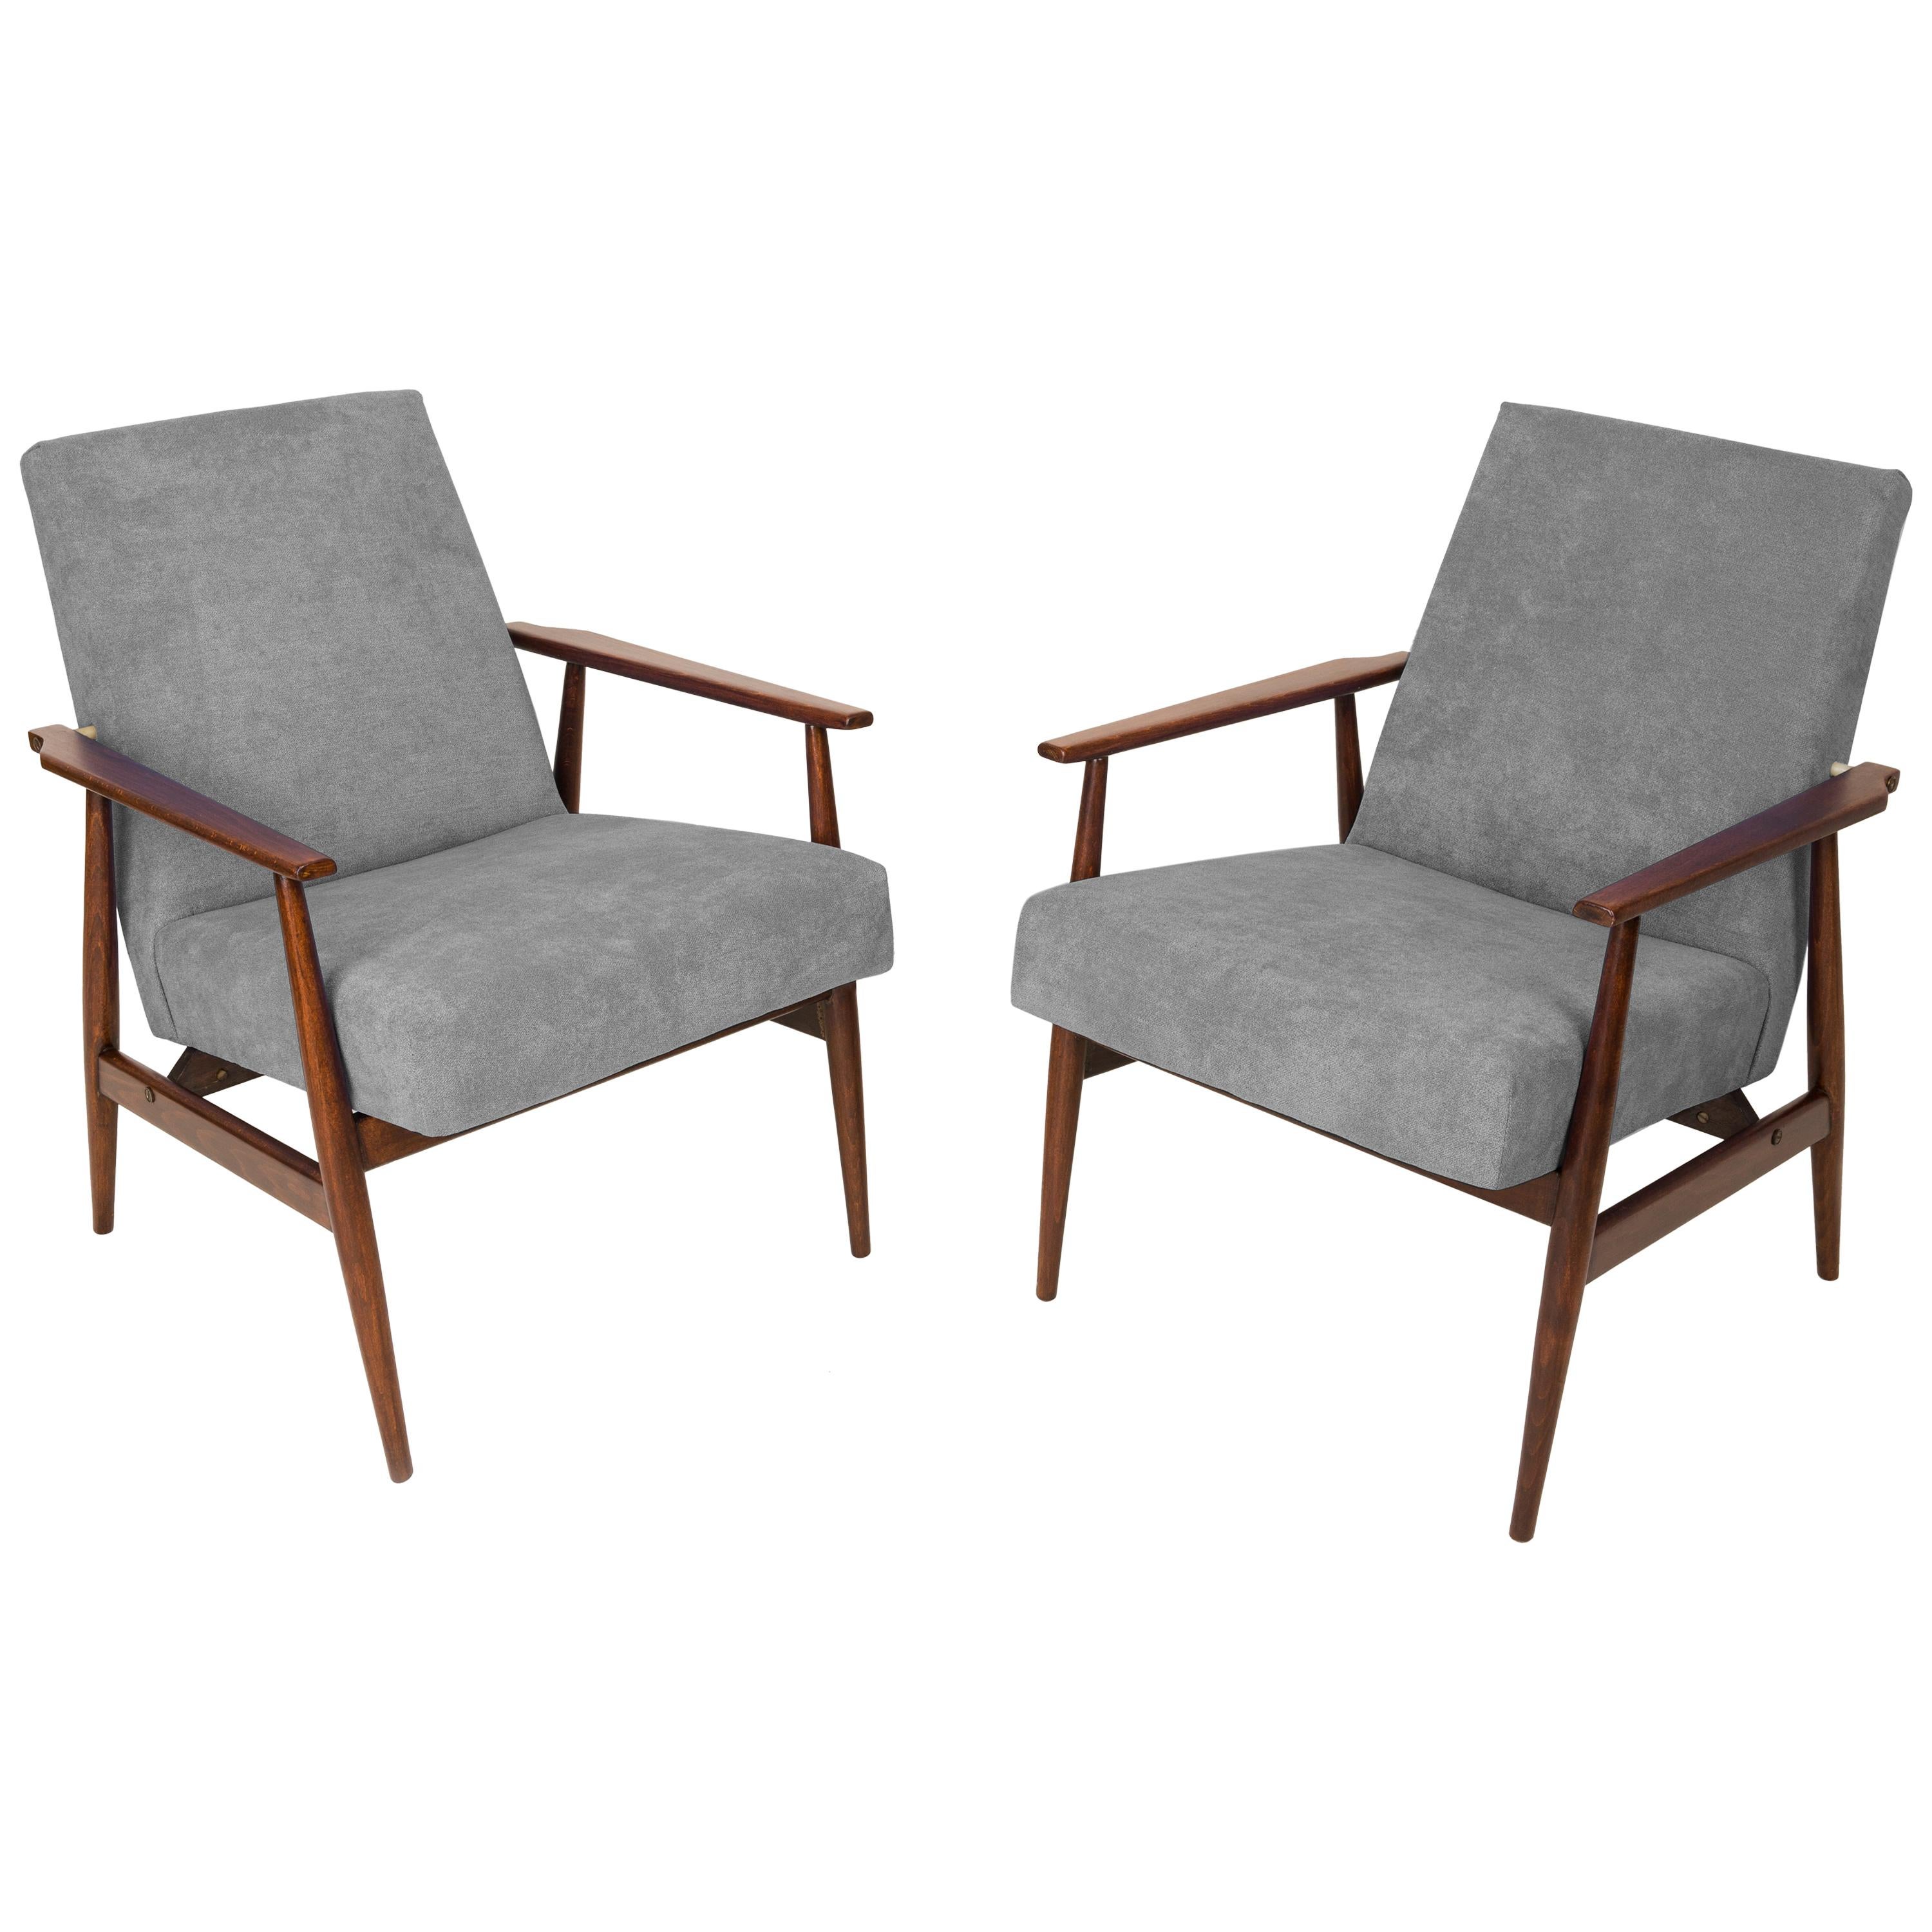 20th Century Pair of Gray Dante Armchairs, H. Lis, 1960s For Sale